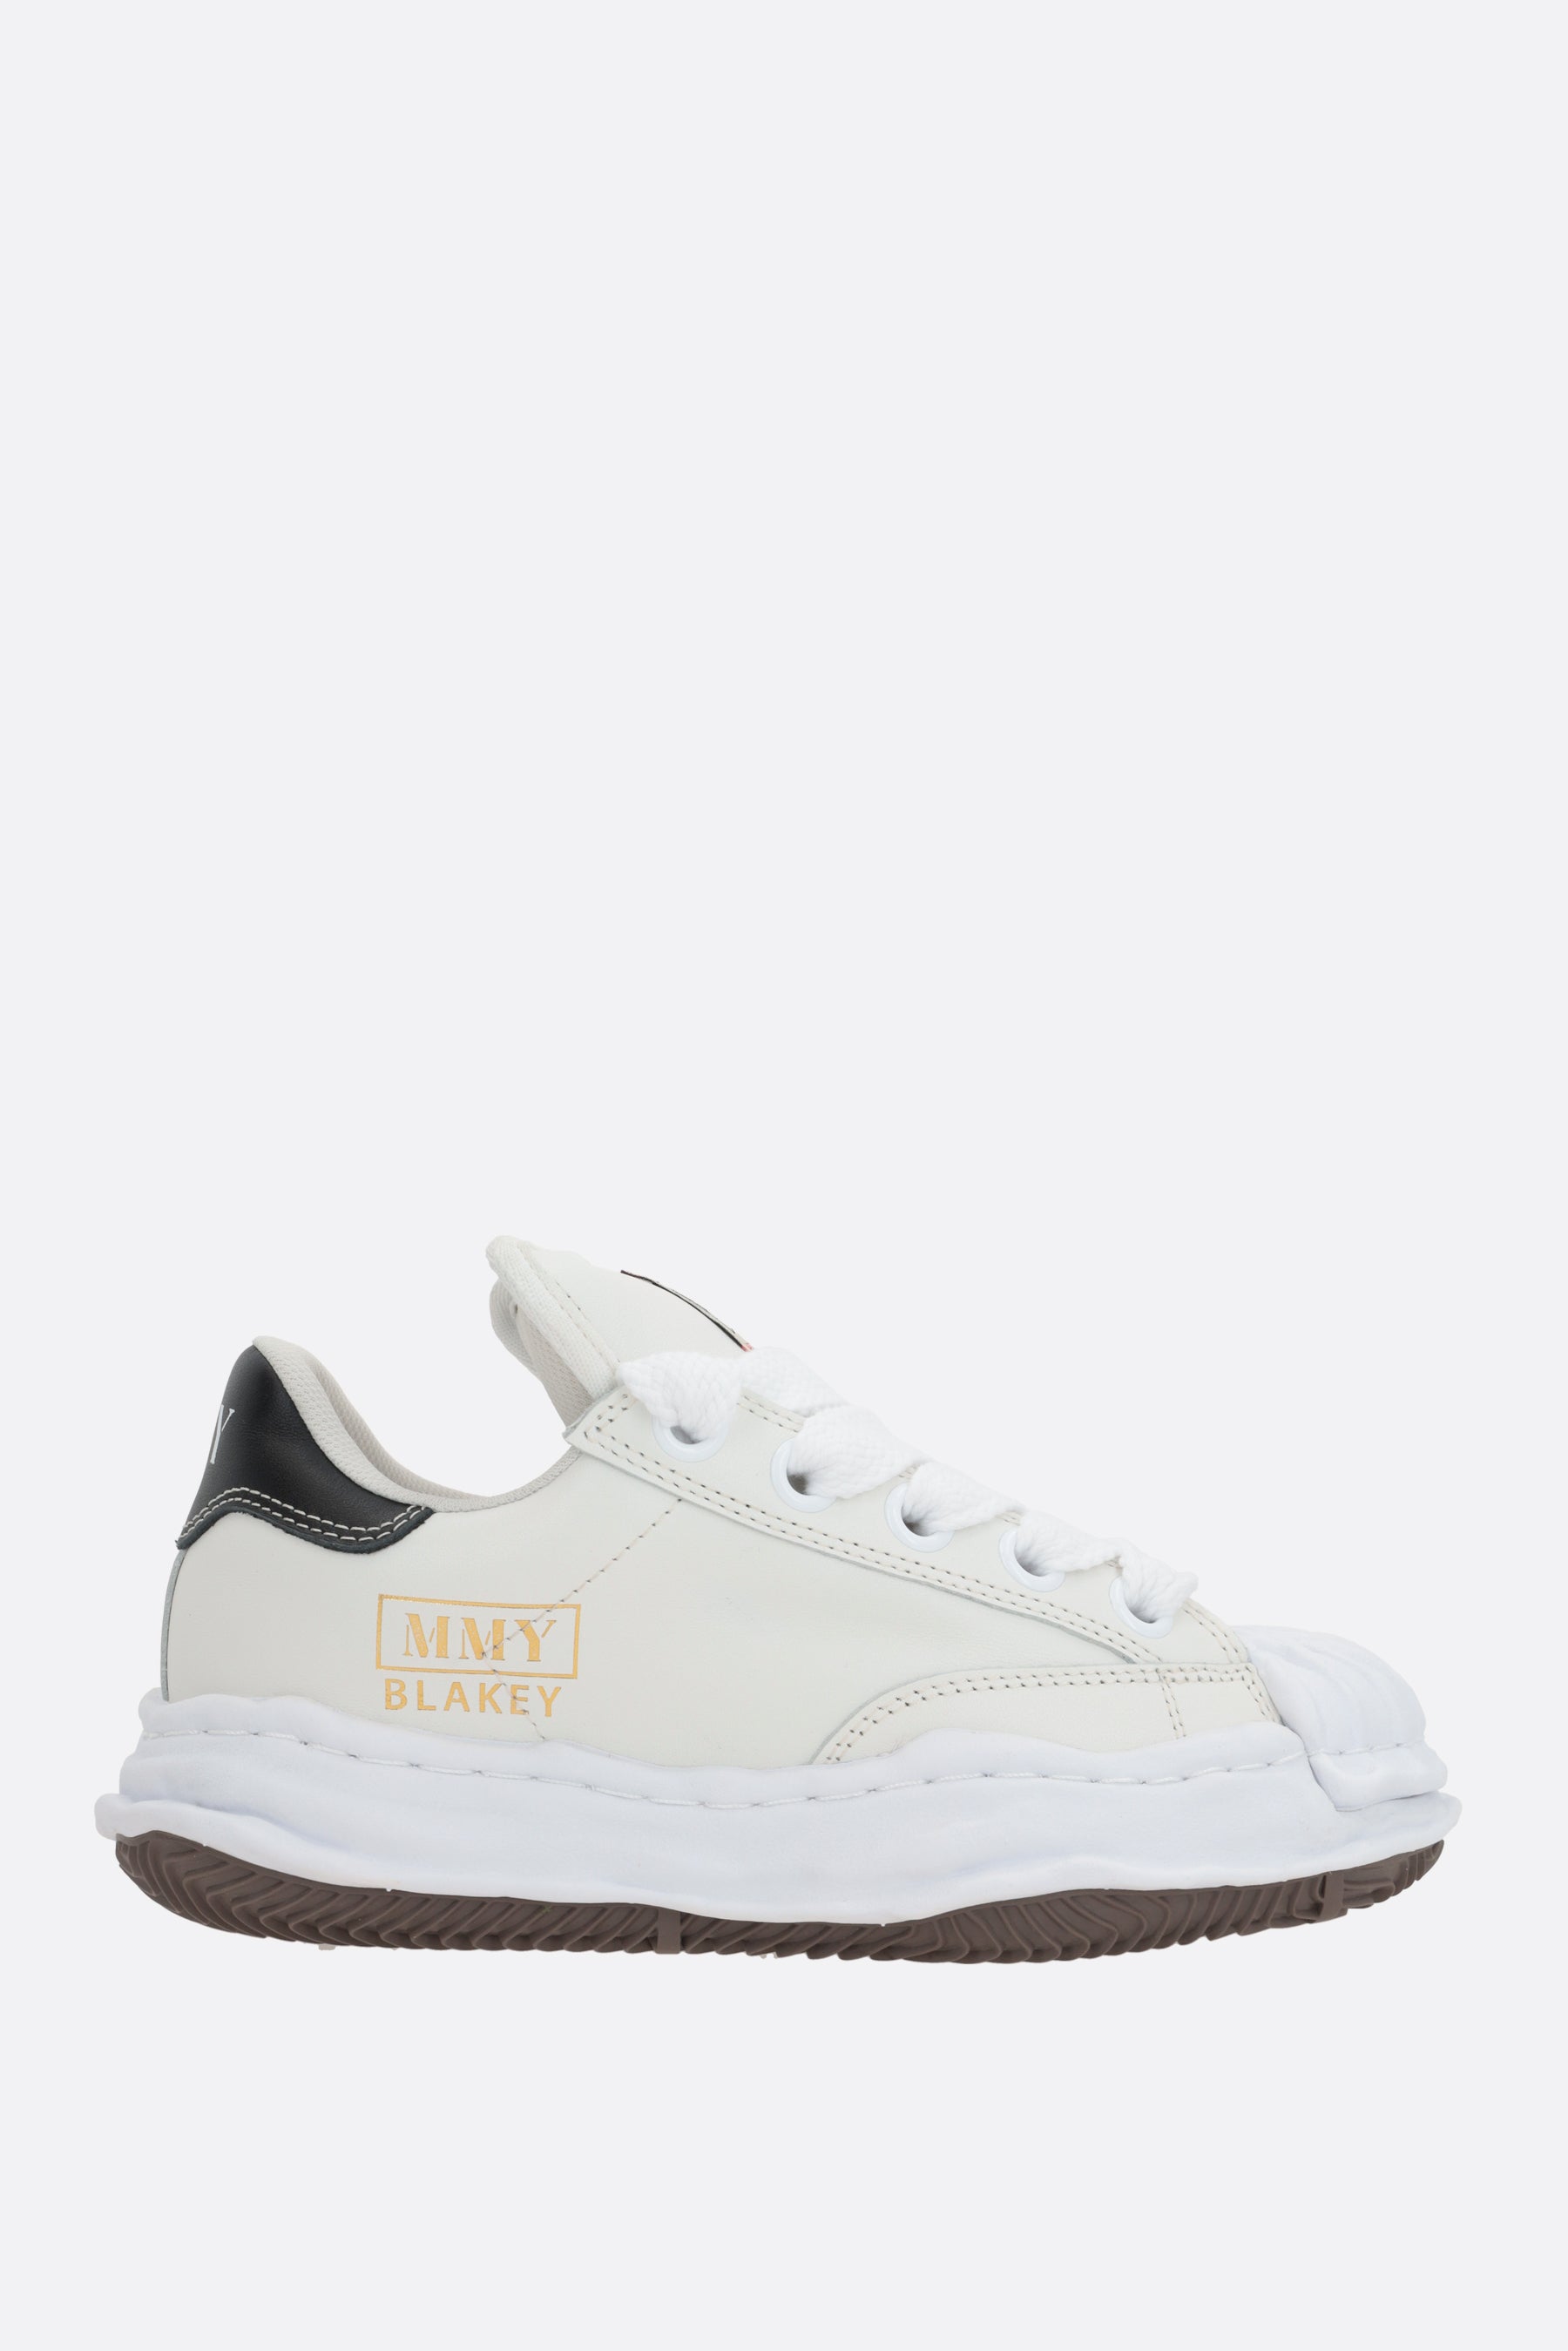 Blakey Original Sole smooth leather sneakers